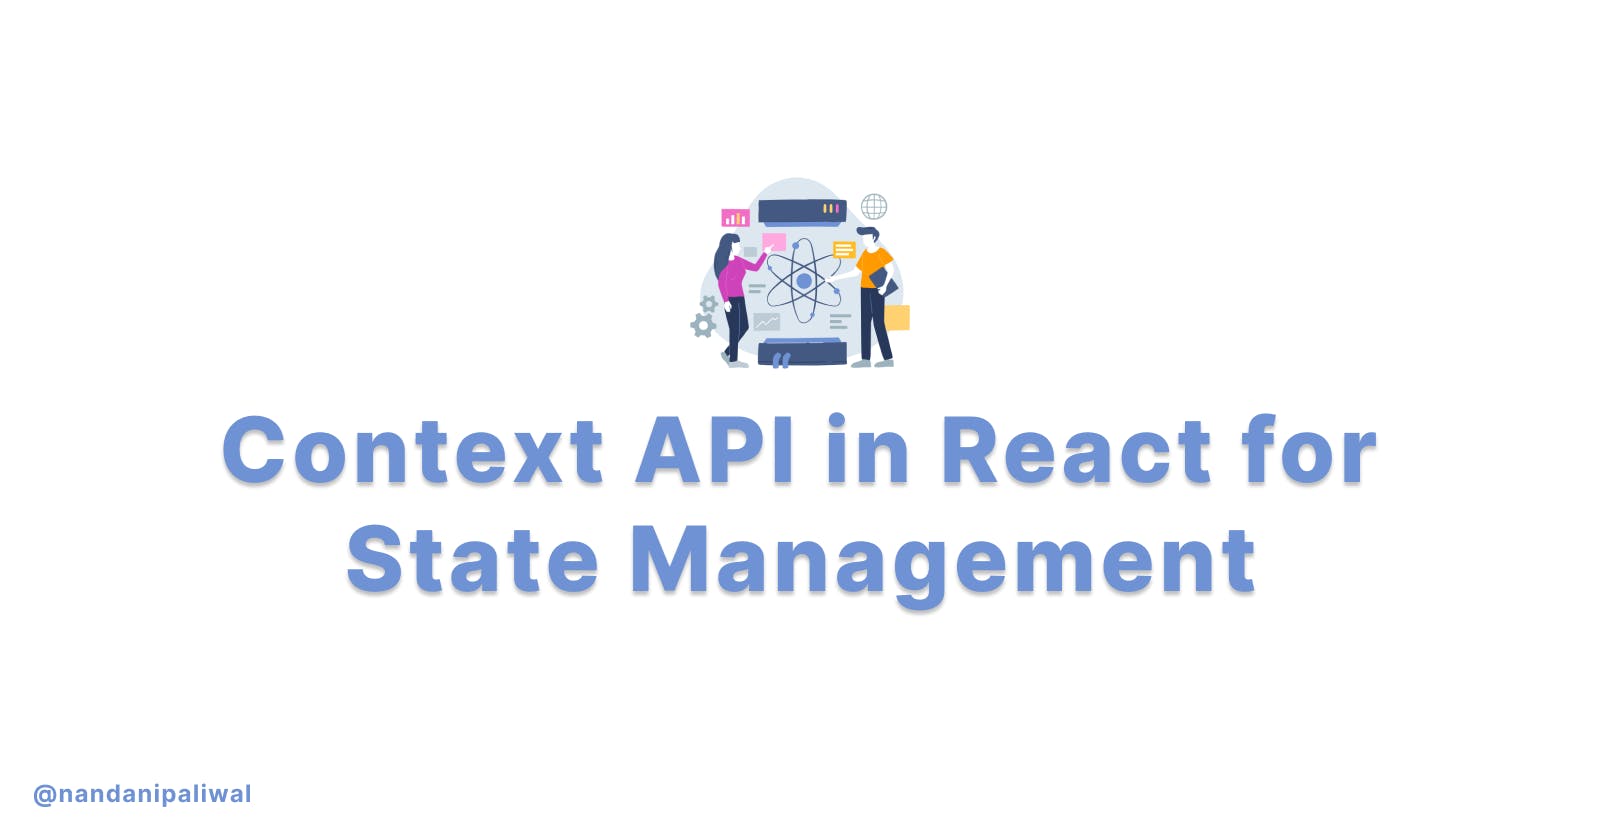 Utilizing Context API in React for State Management